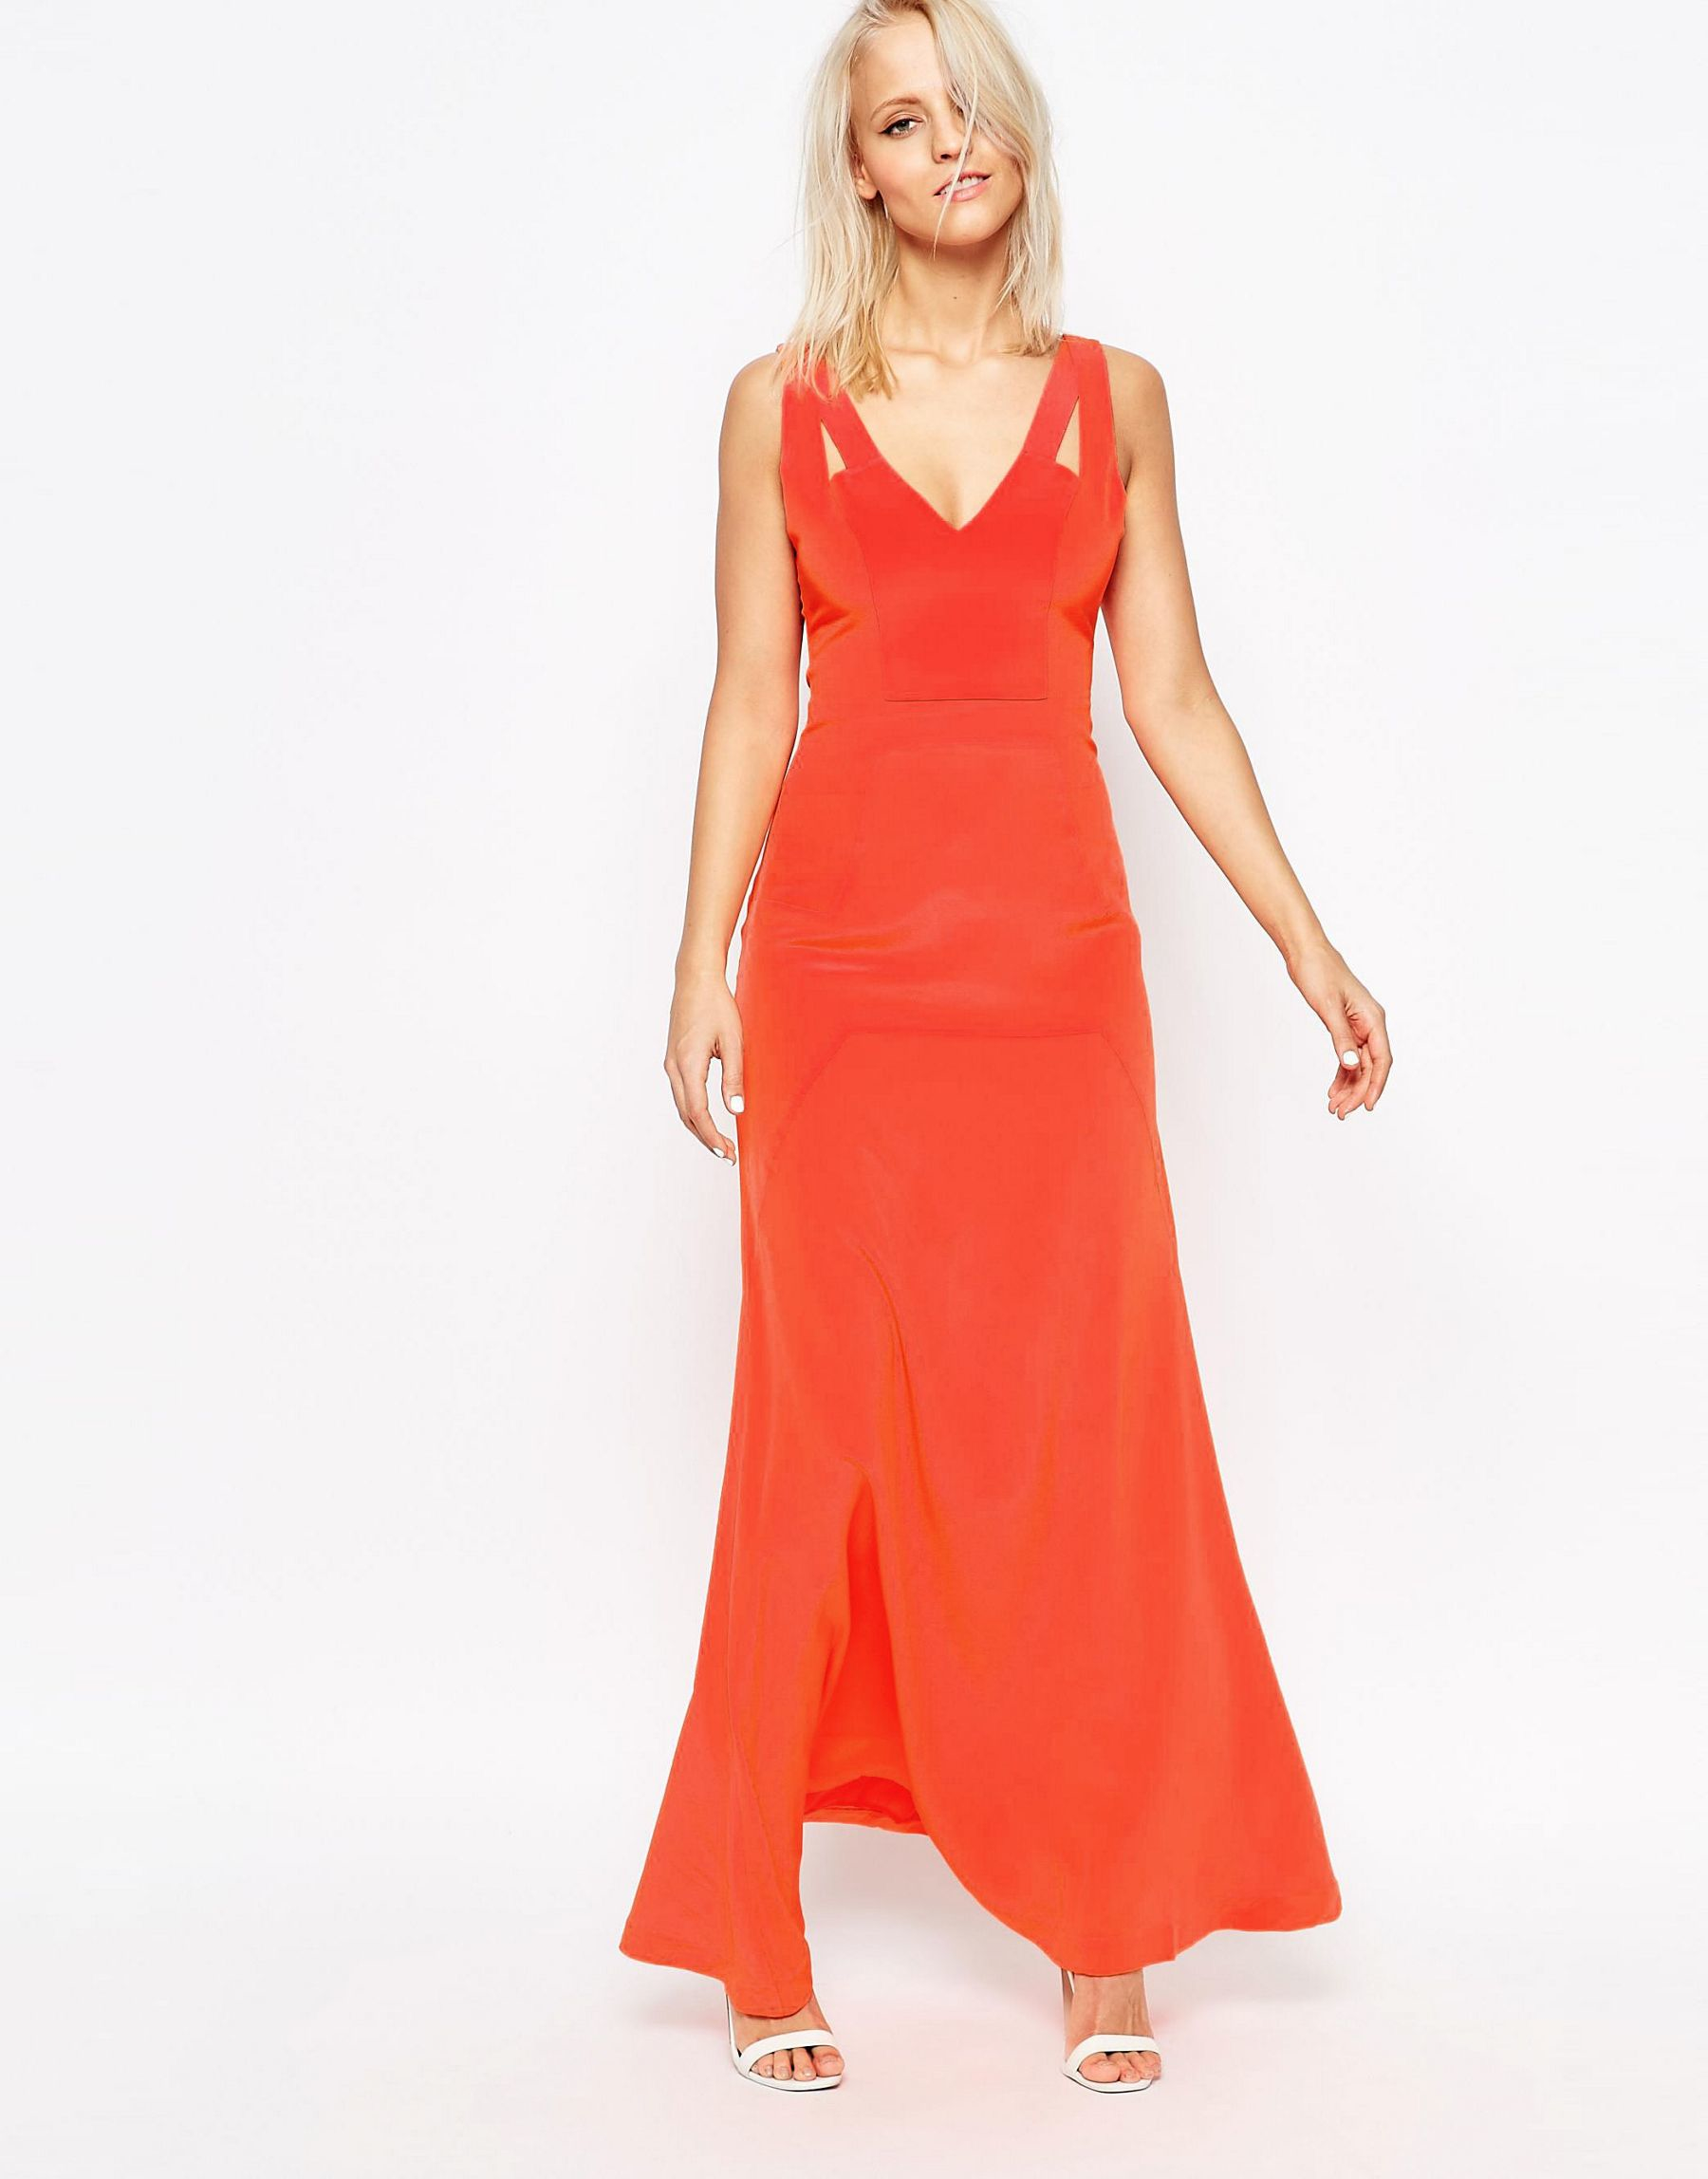 Suboo Uboo Tangerine Silk Double Strap Maxi Dress in Red | Lyst